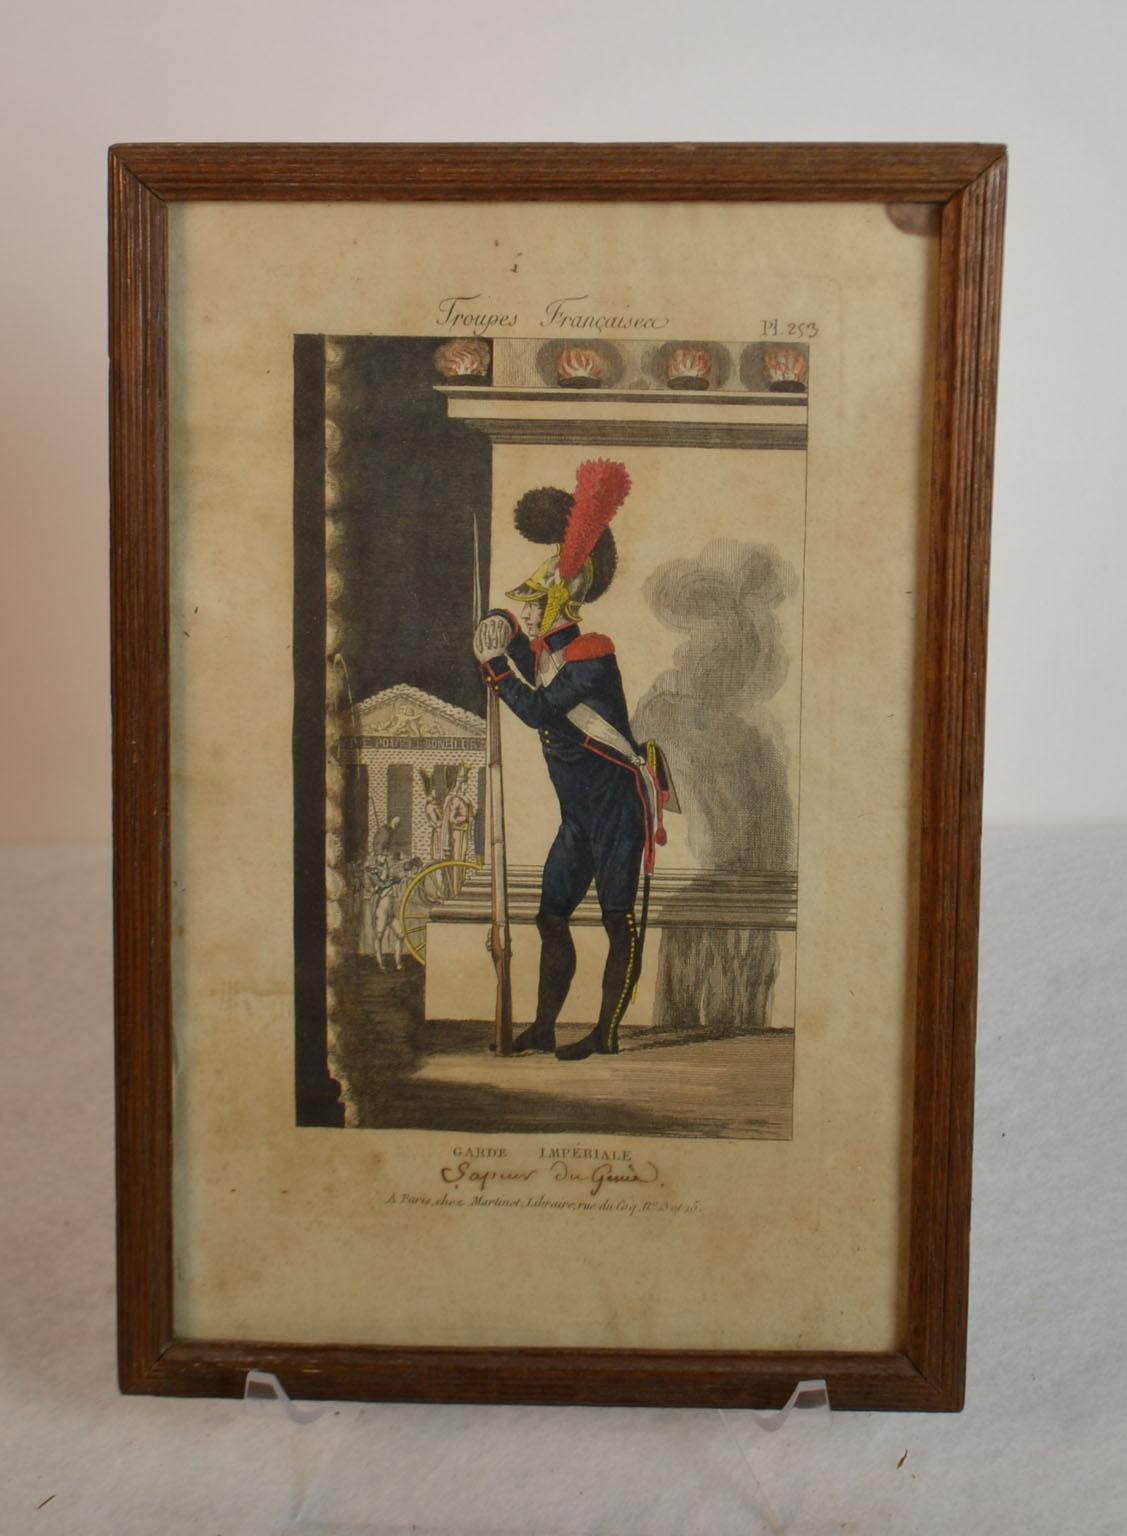 Framed Empire period engraving of French cavalry French troops: Imperial Guard bookseller A. Martinet in Paris, and Saluden Brest Galarie.